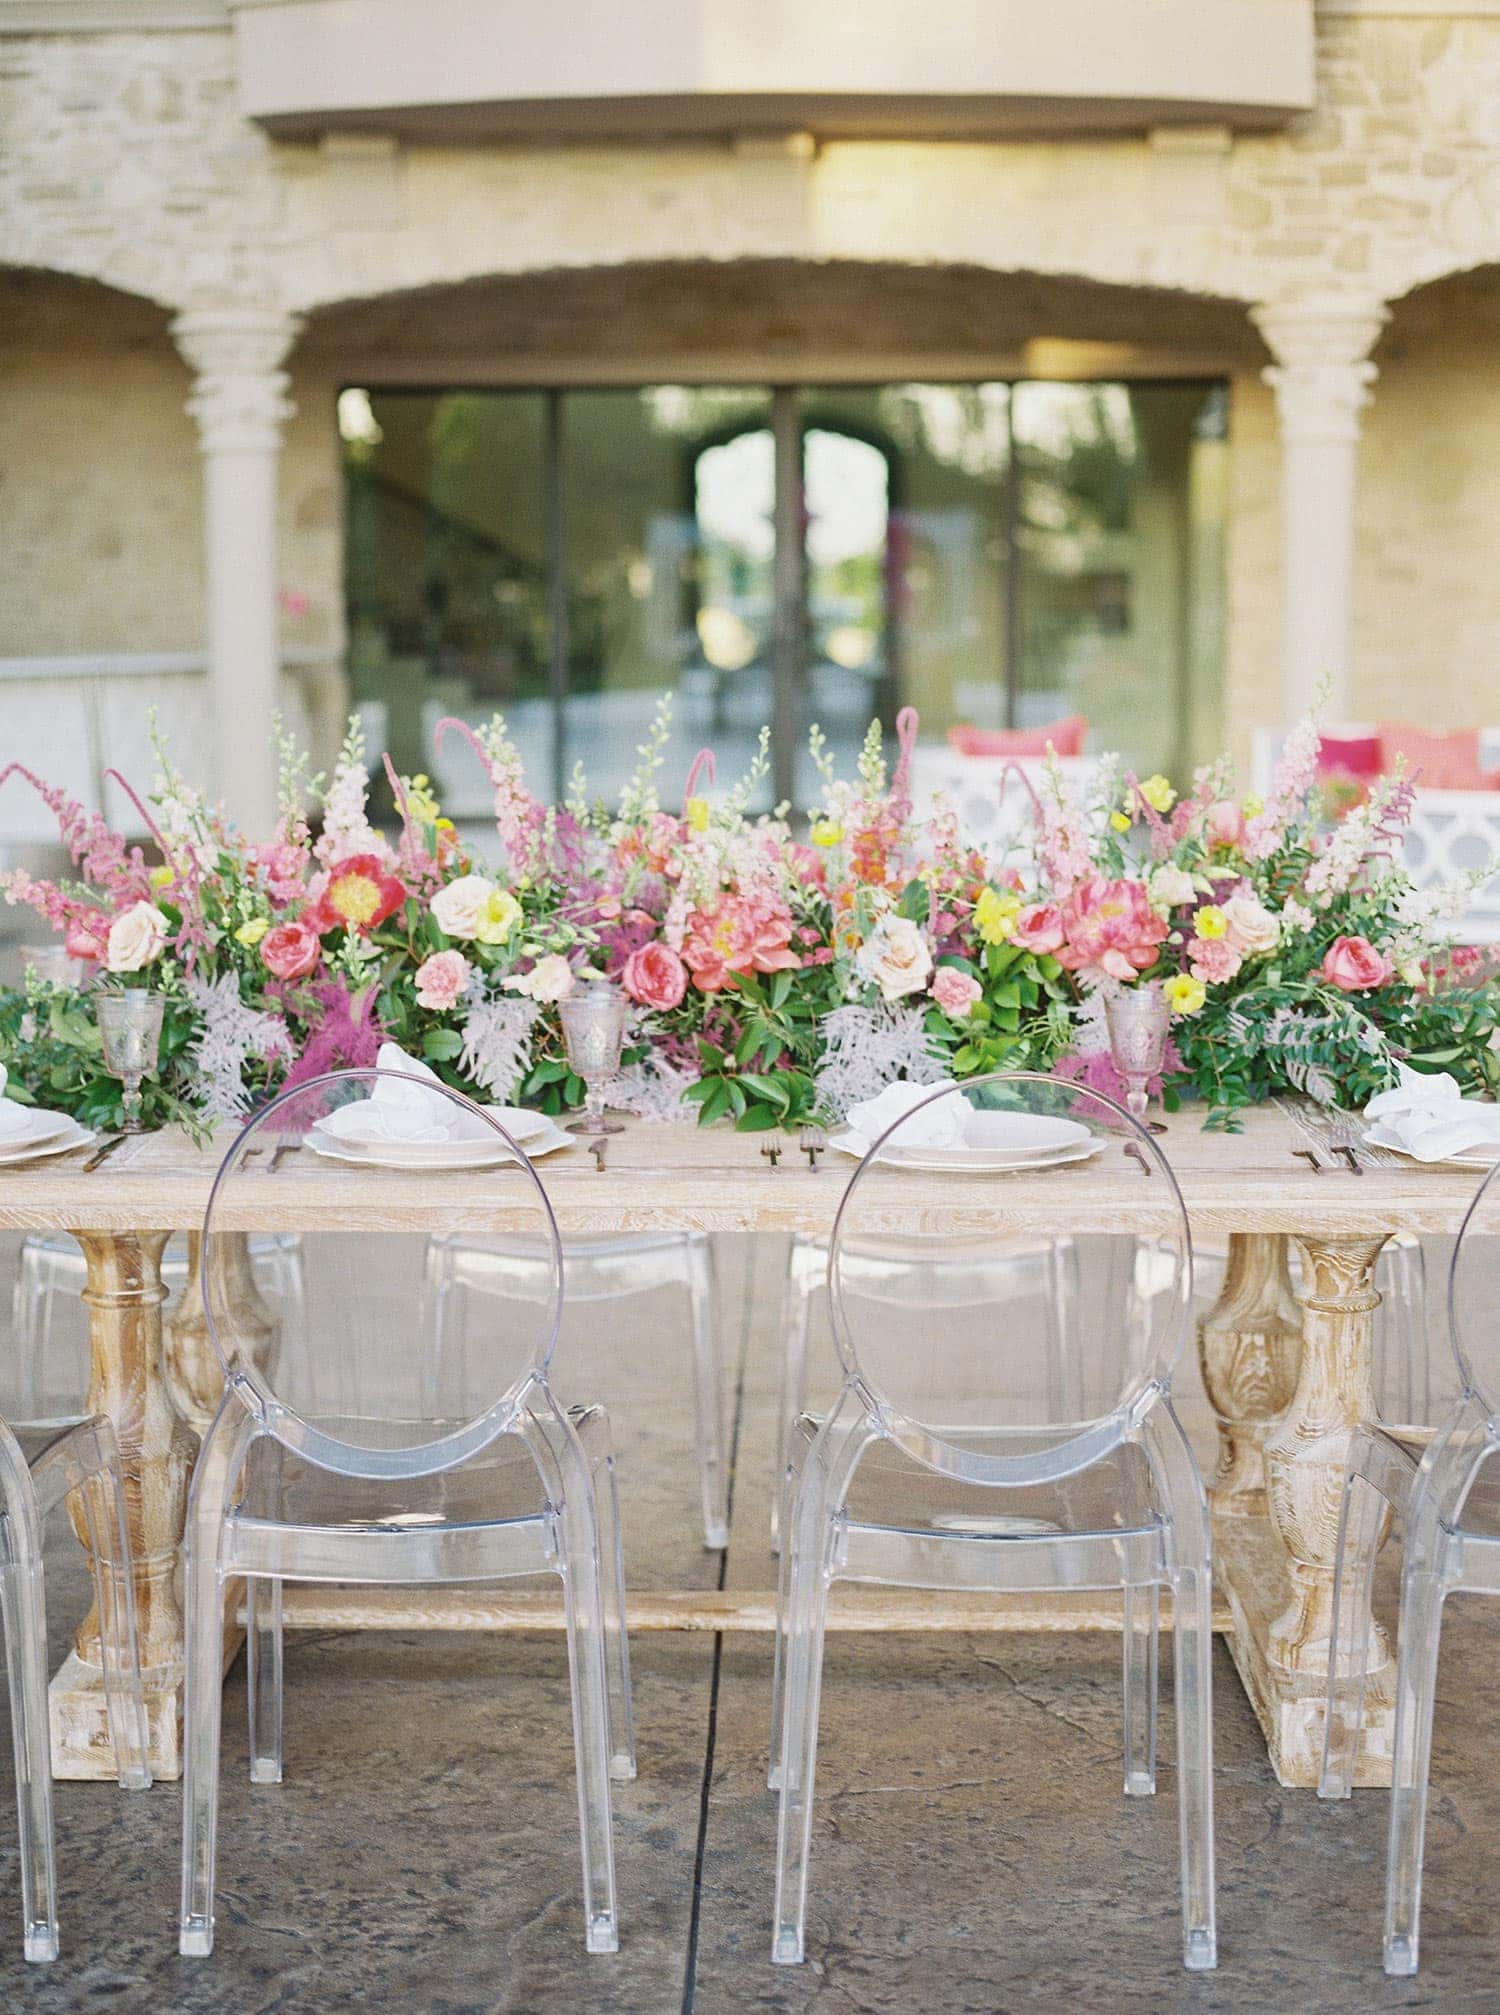 Tuscany Table with Flowers and Ghost Arm Chairs